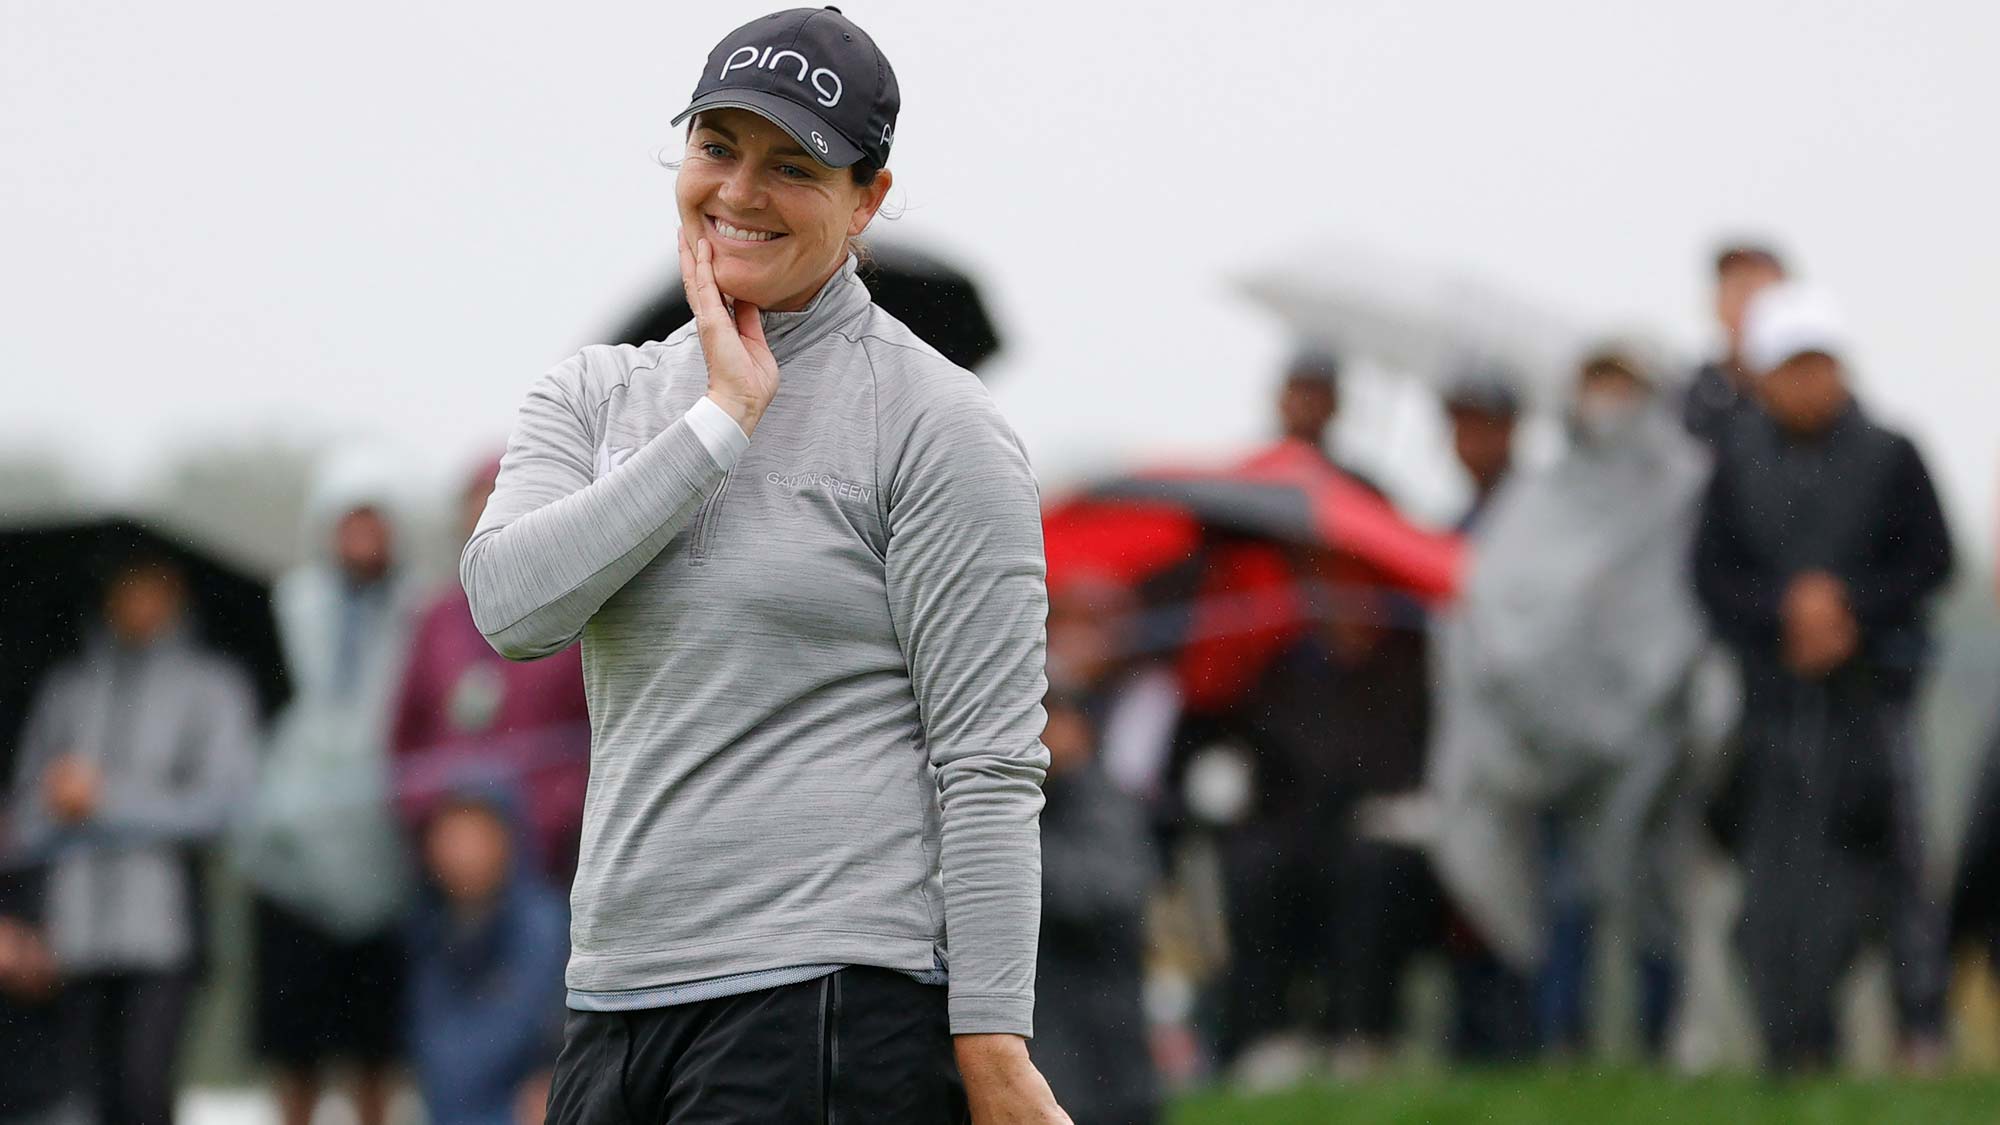 Caroline Masson of Germany reacts after her putt on the 18th green during the final round of the Cognizant Founders Cup